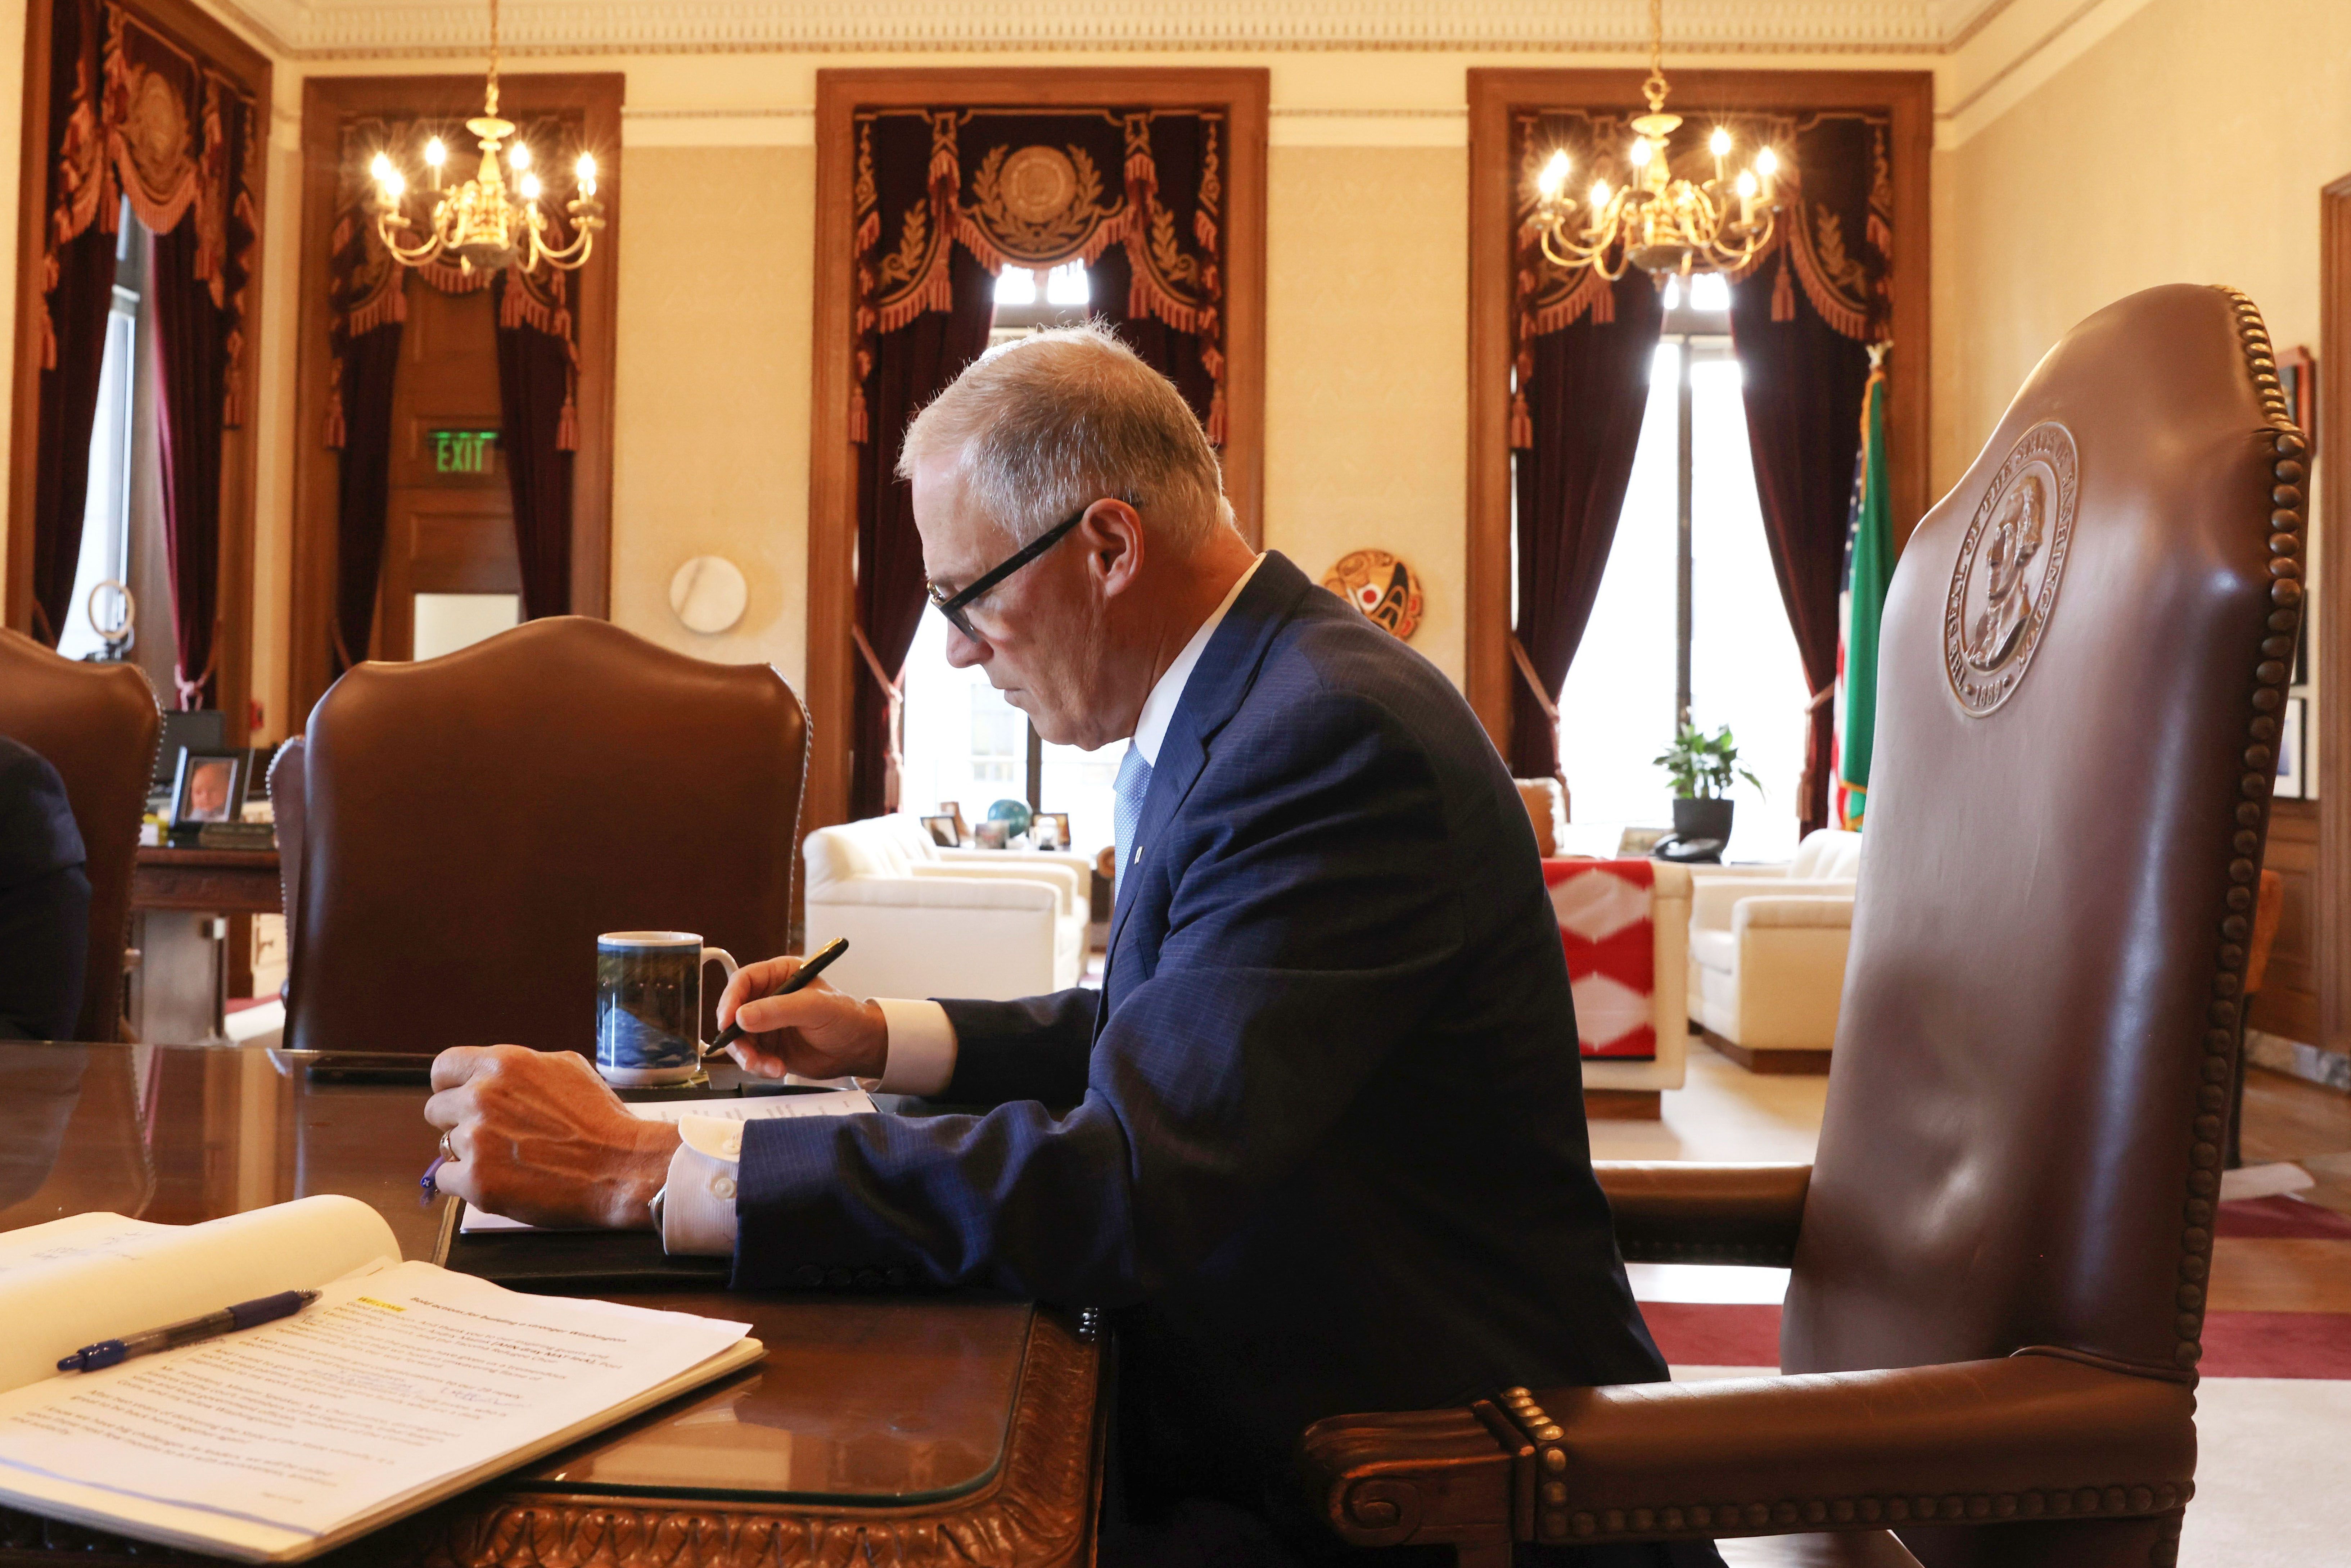 Washington Gov. Jay Inslee prepares his 2023 State of the State address at the Capitol in Olympia, Wash., on Jan. 10, 2023.